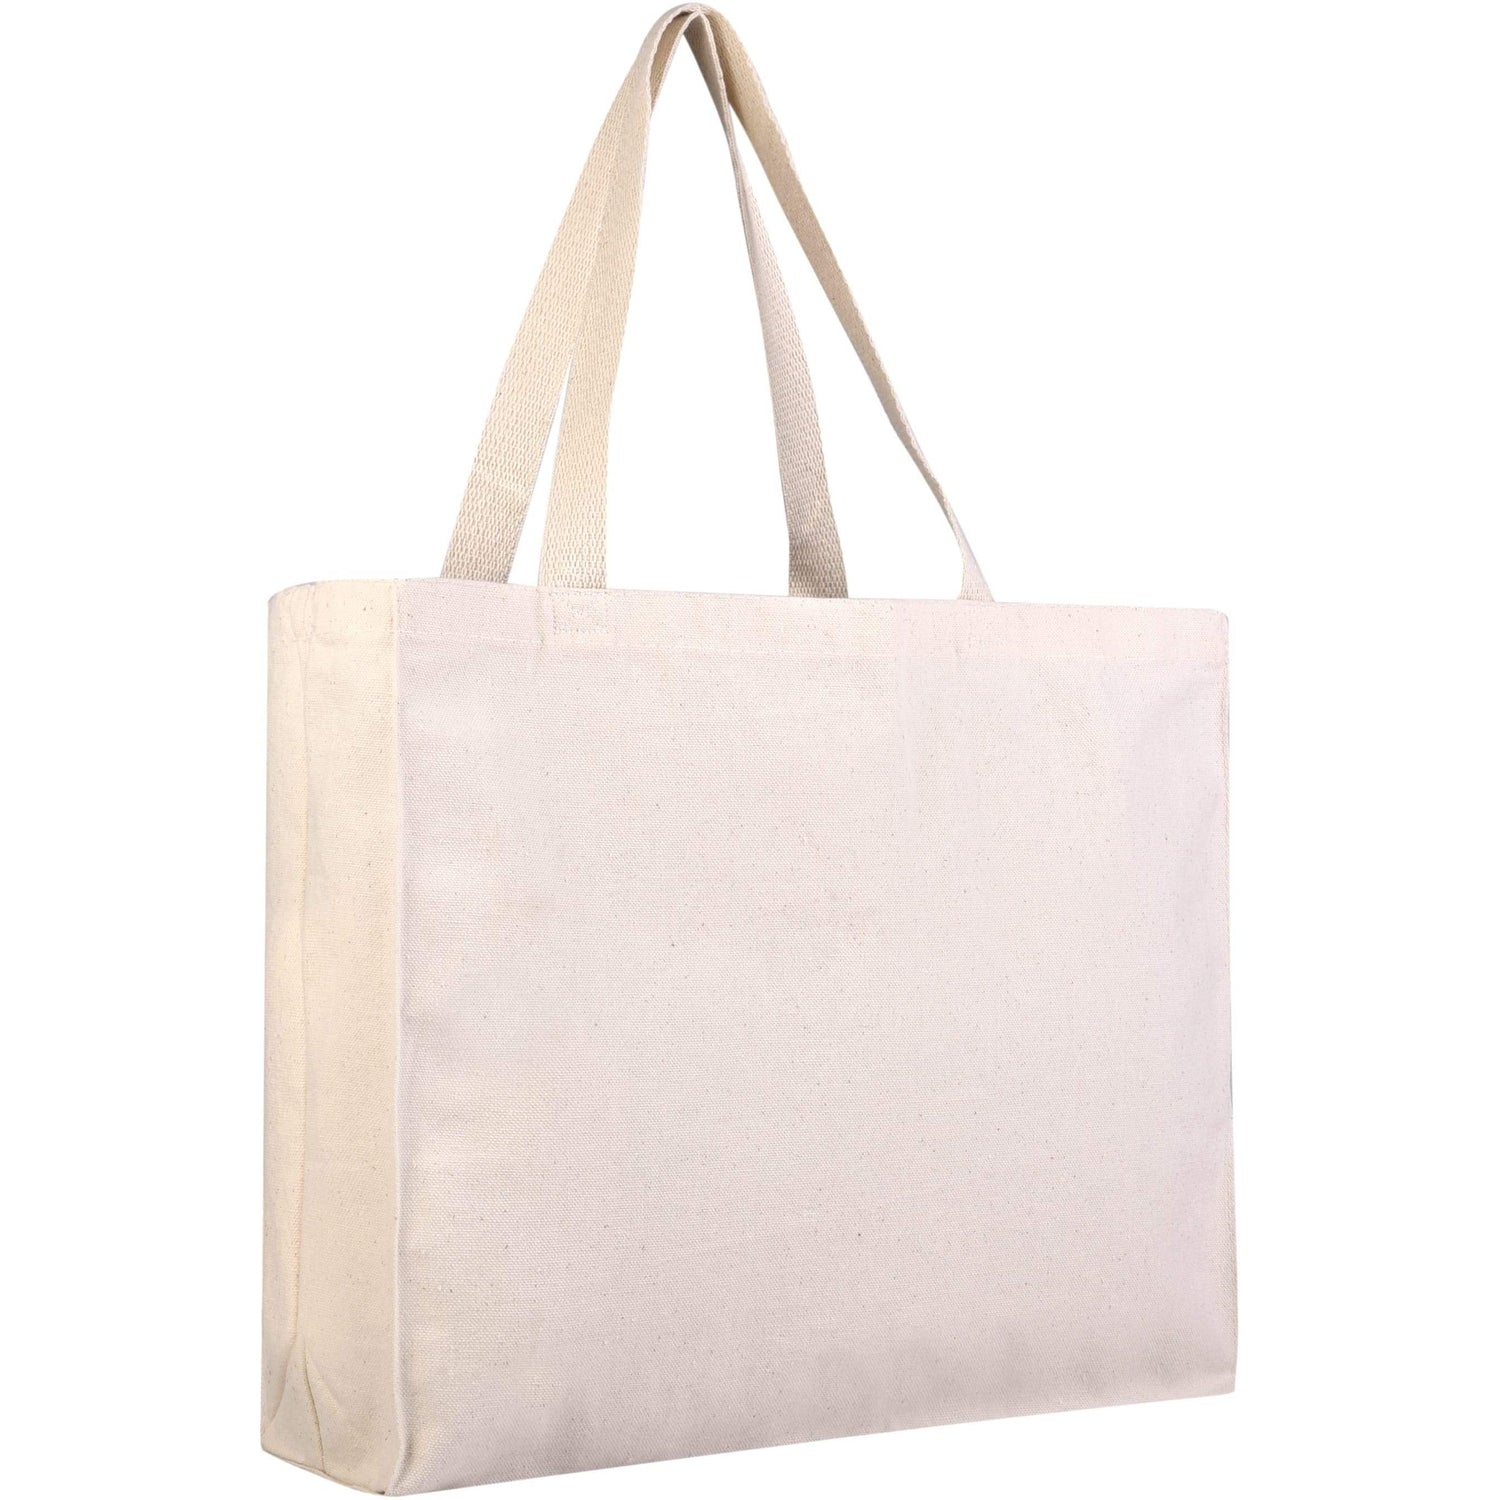 Wholesale Canvas Bags & Blank Canvas Tote Bags with Gusset – BagzDepot™